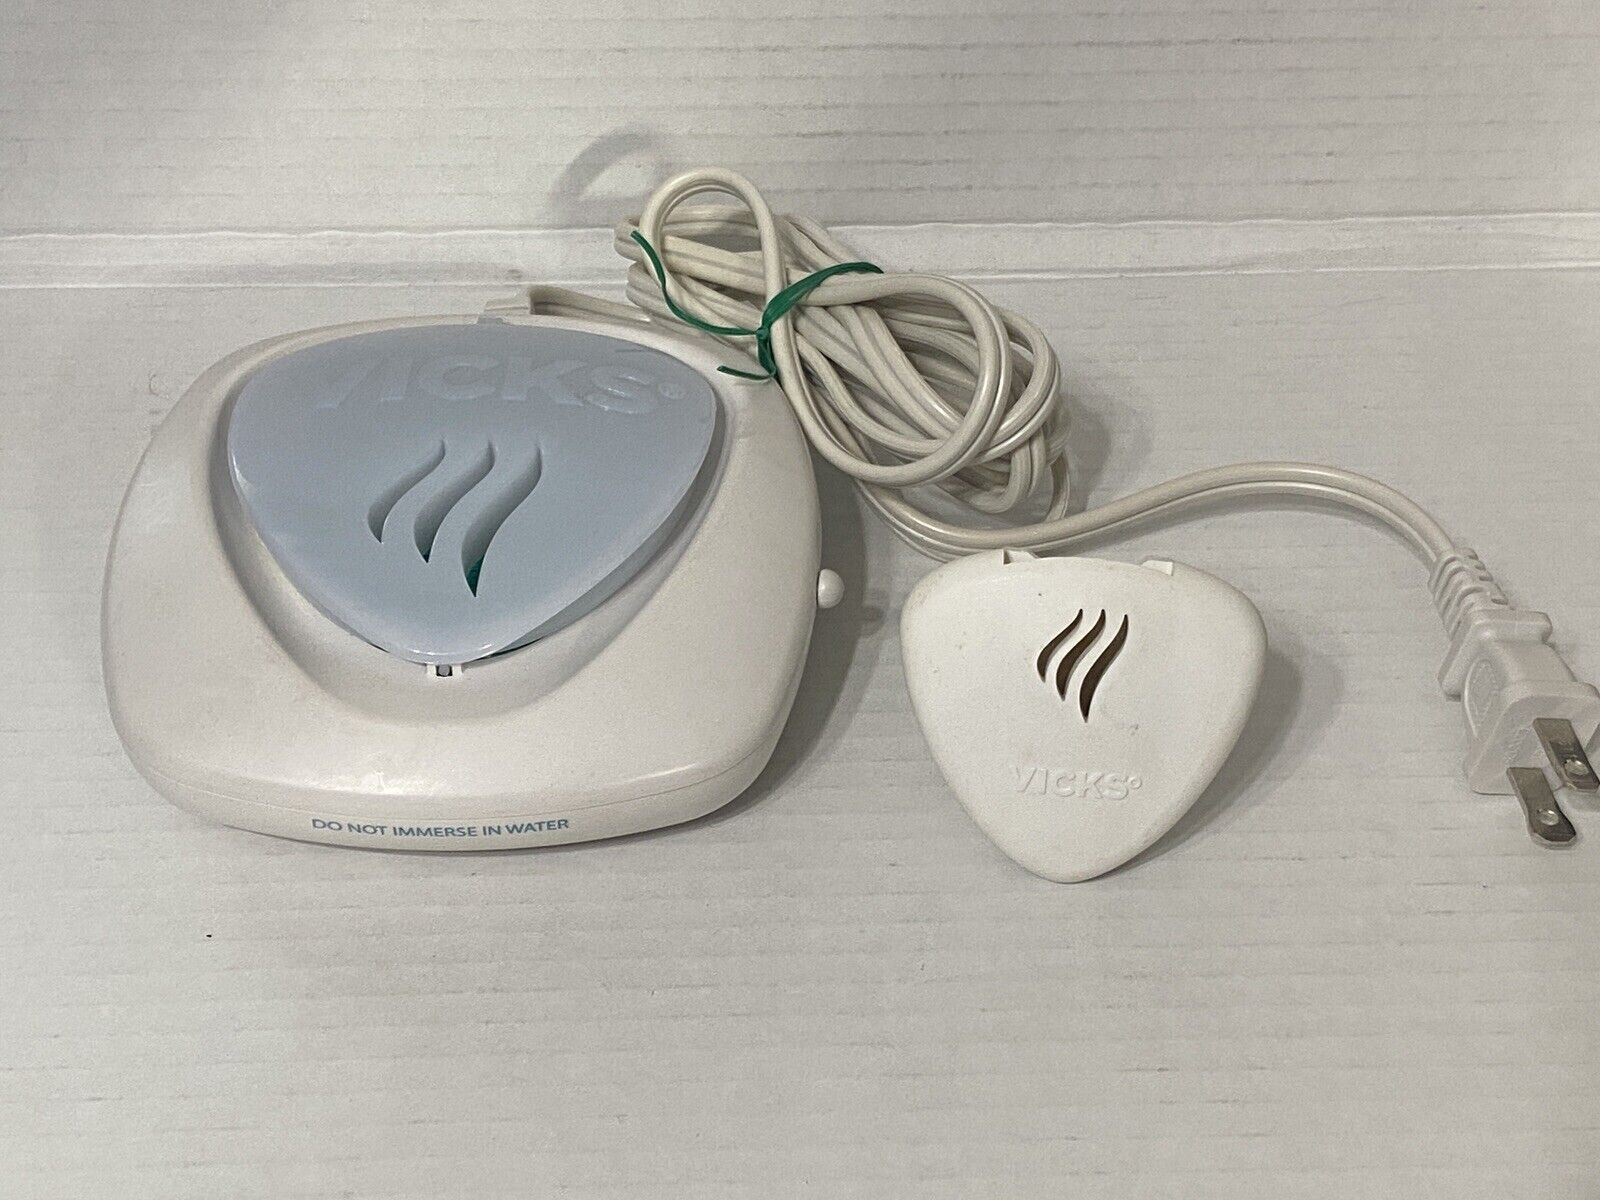 White electronic device with cord and plug - Vicks Plug-in Waterless Vaporizer